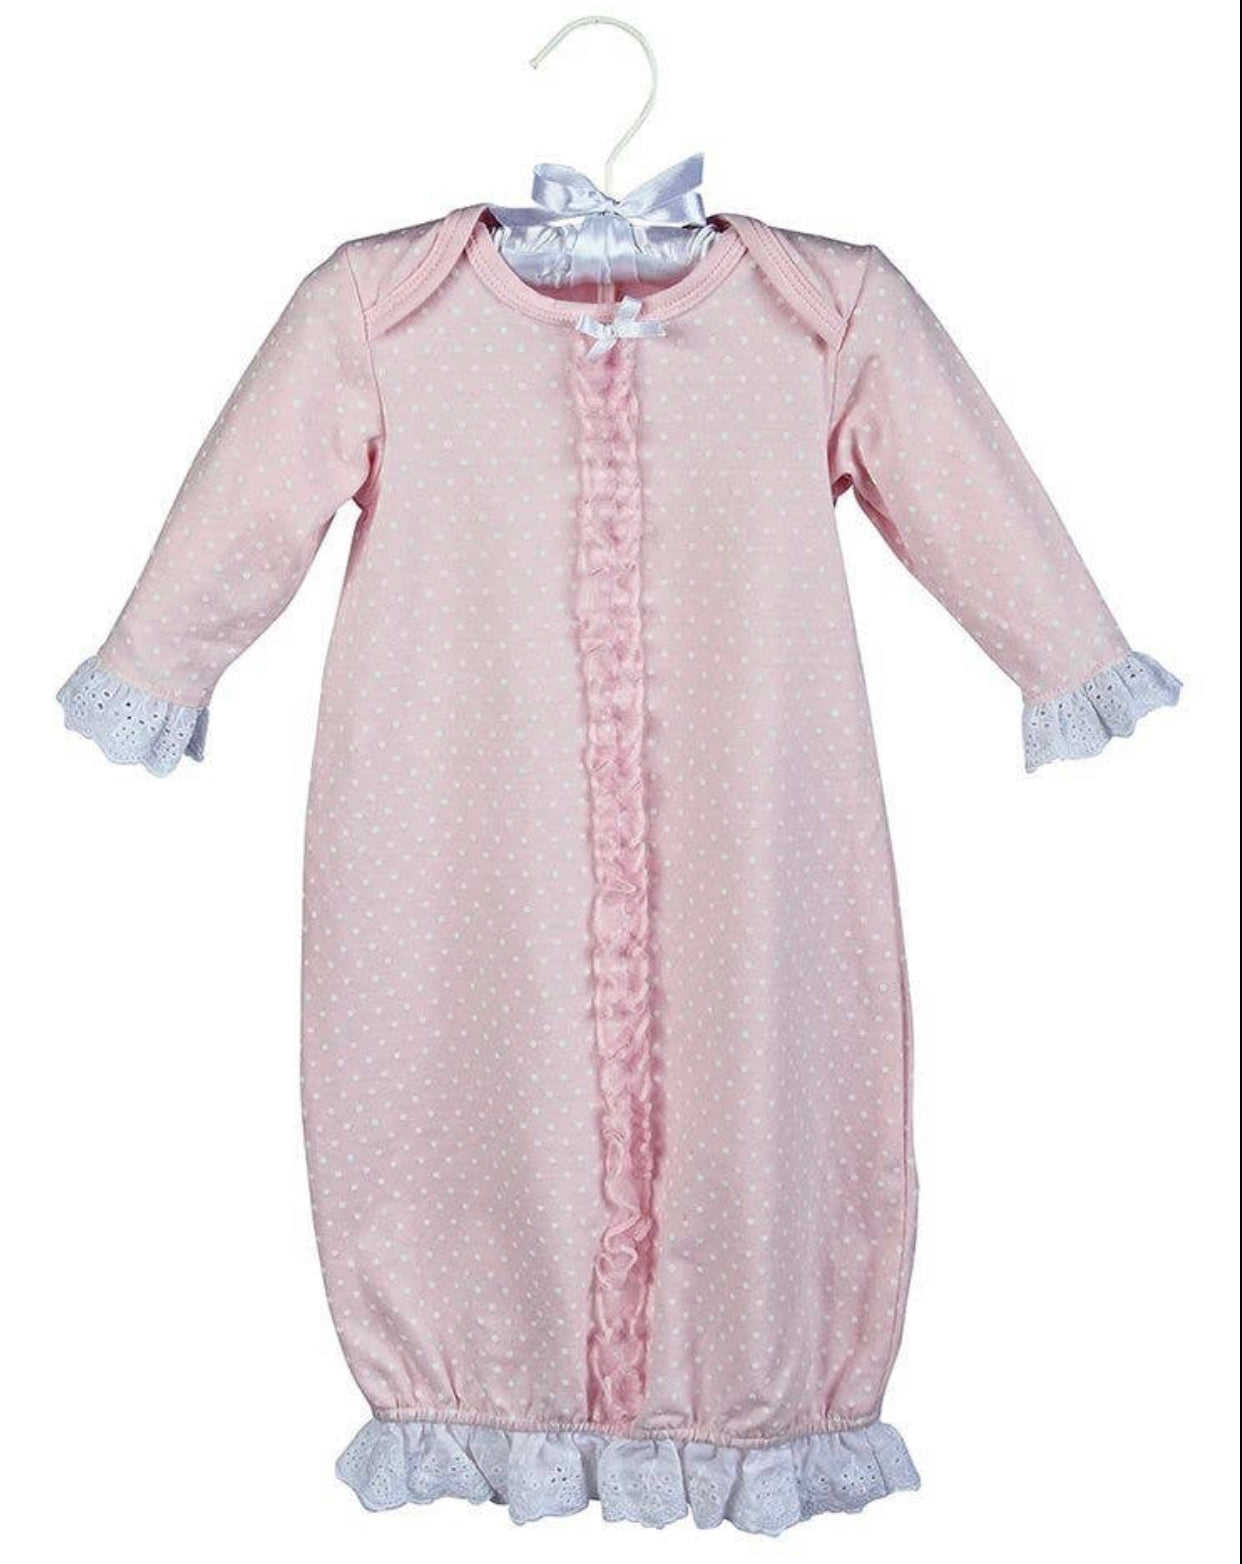 Pink PolkaDot Baby Gown